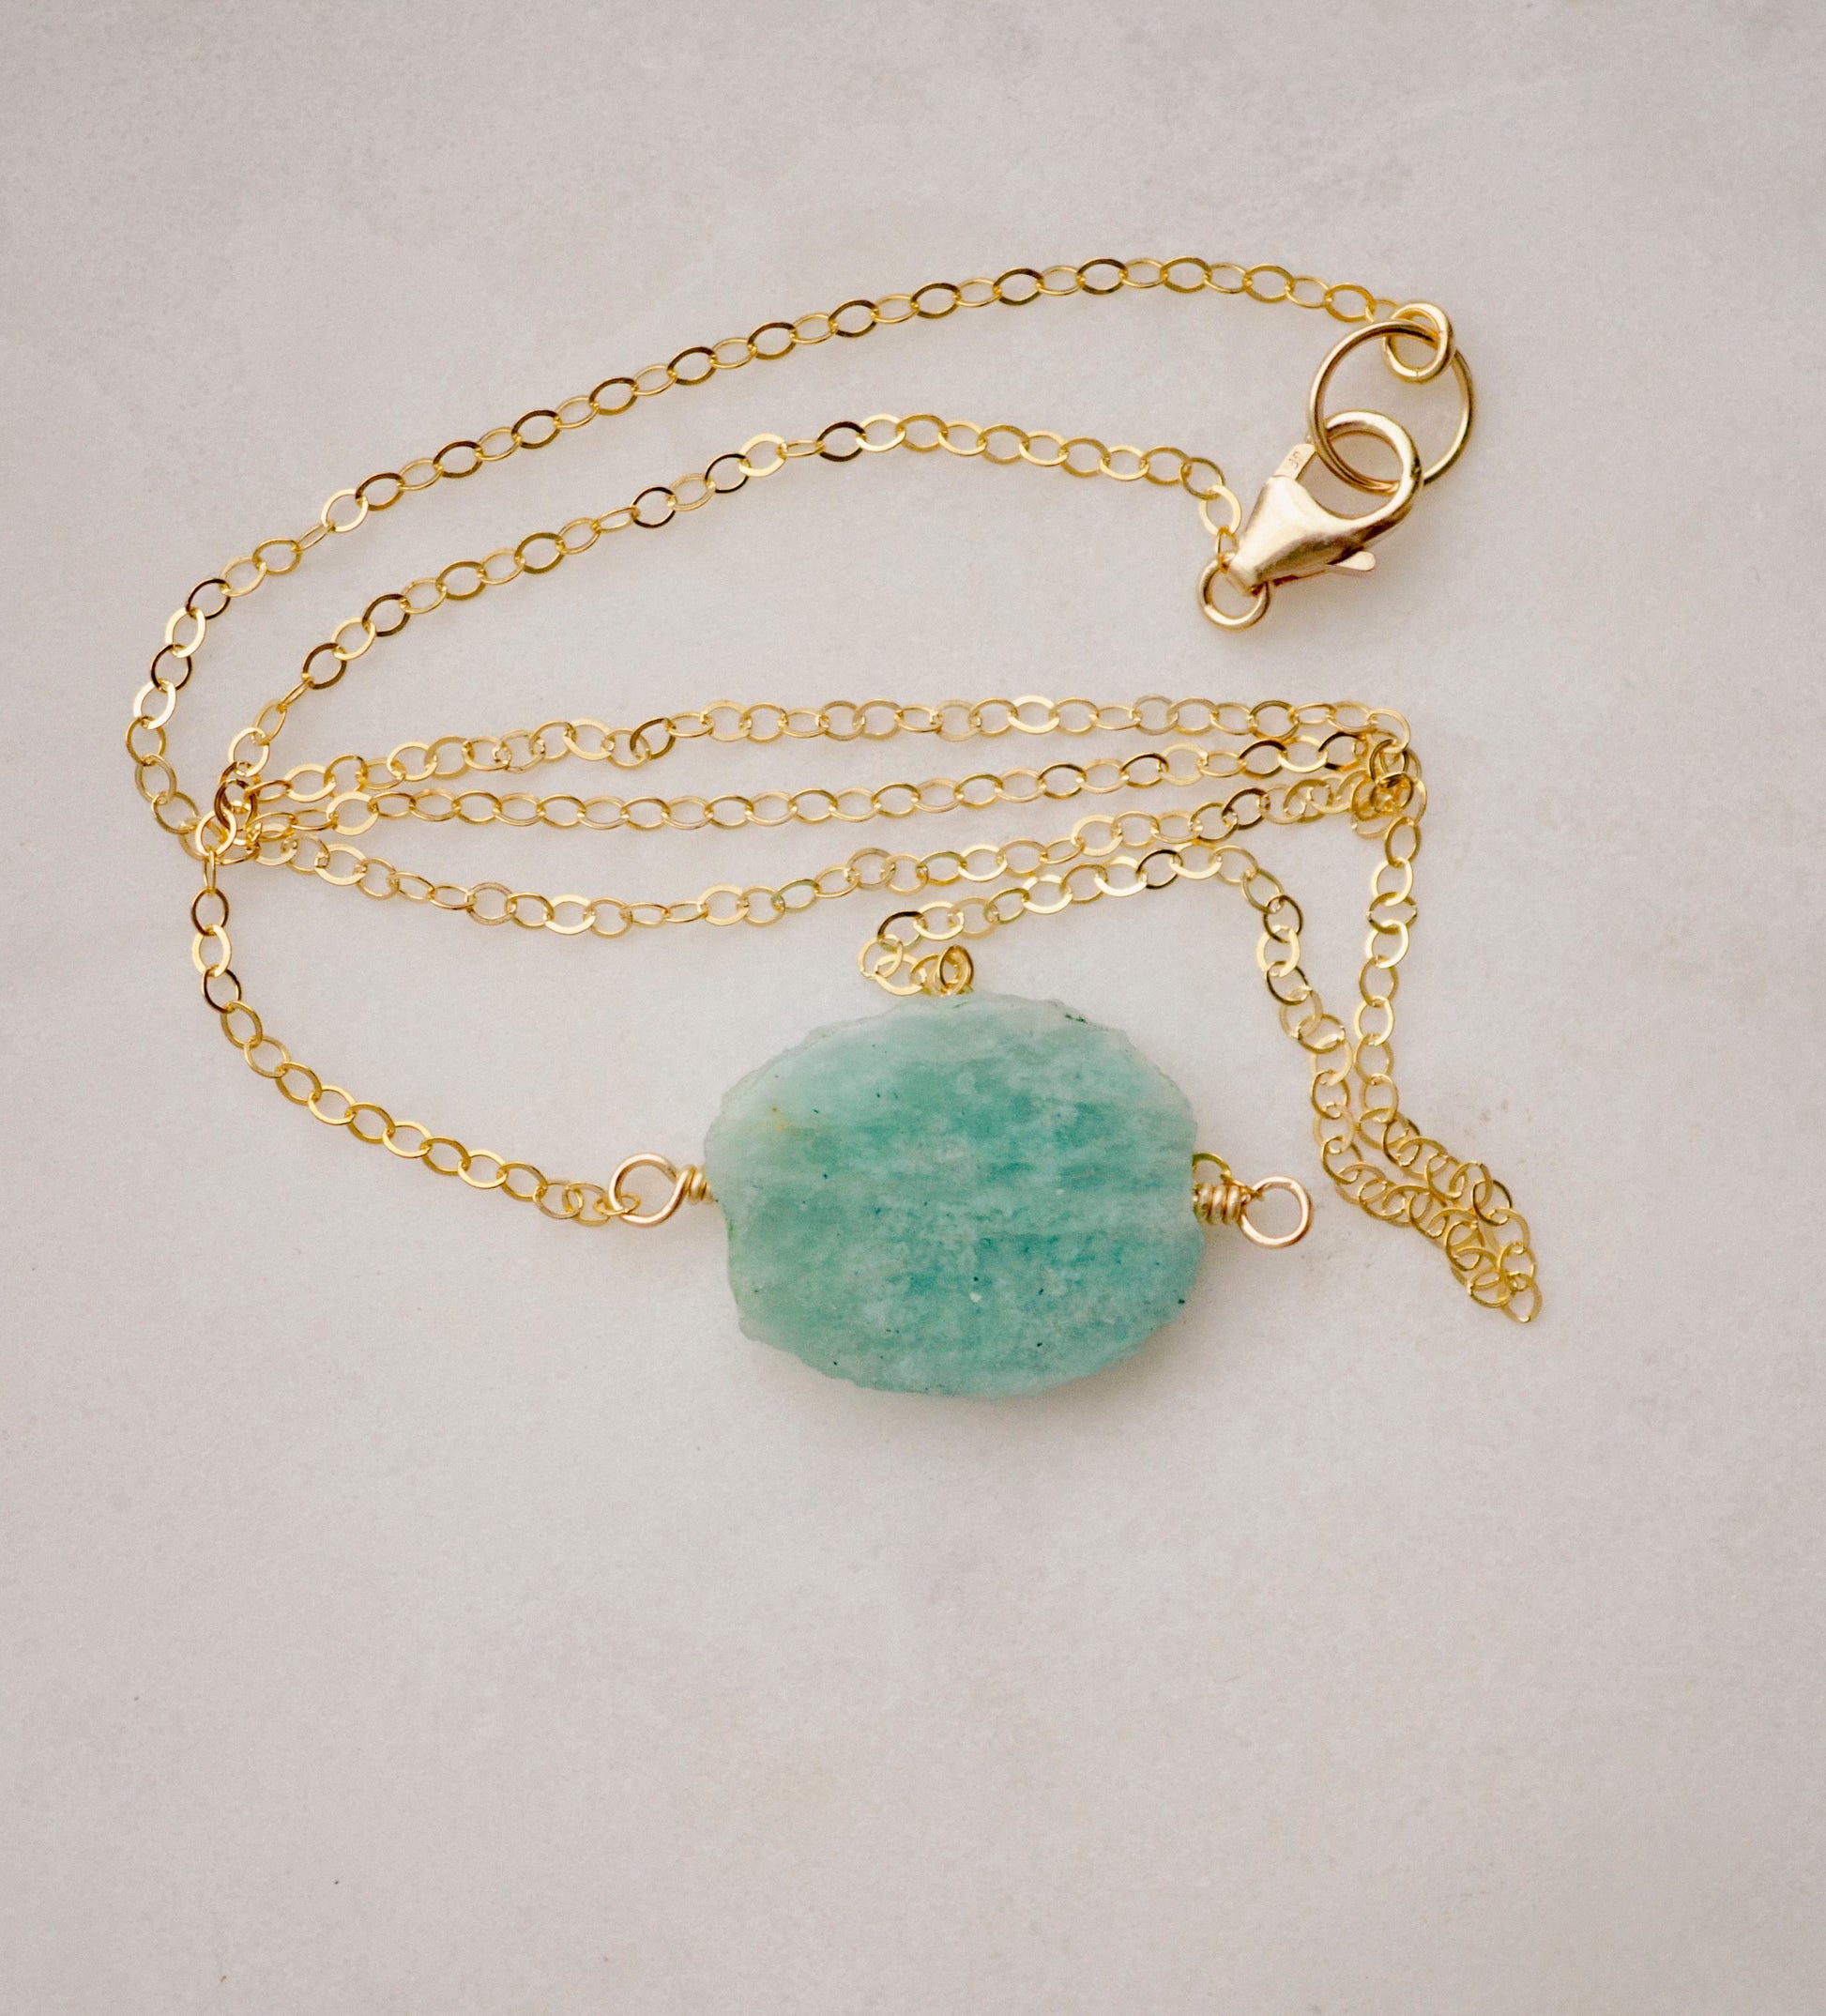 Aqua blue amazonite slice gemstone set onto a 14k gold filled chain. The stone is semi oval in shape, but irregular. It's smooth polished, but with raw edges. Shown with non-adjustable length clasp.